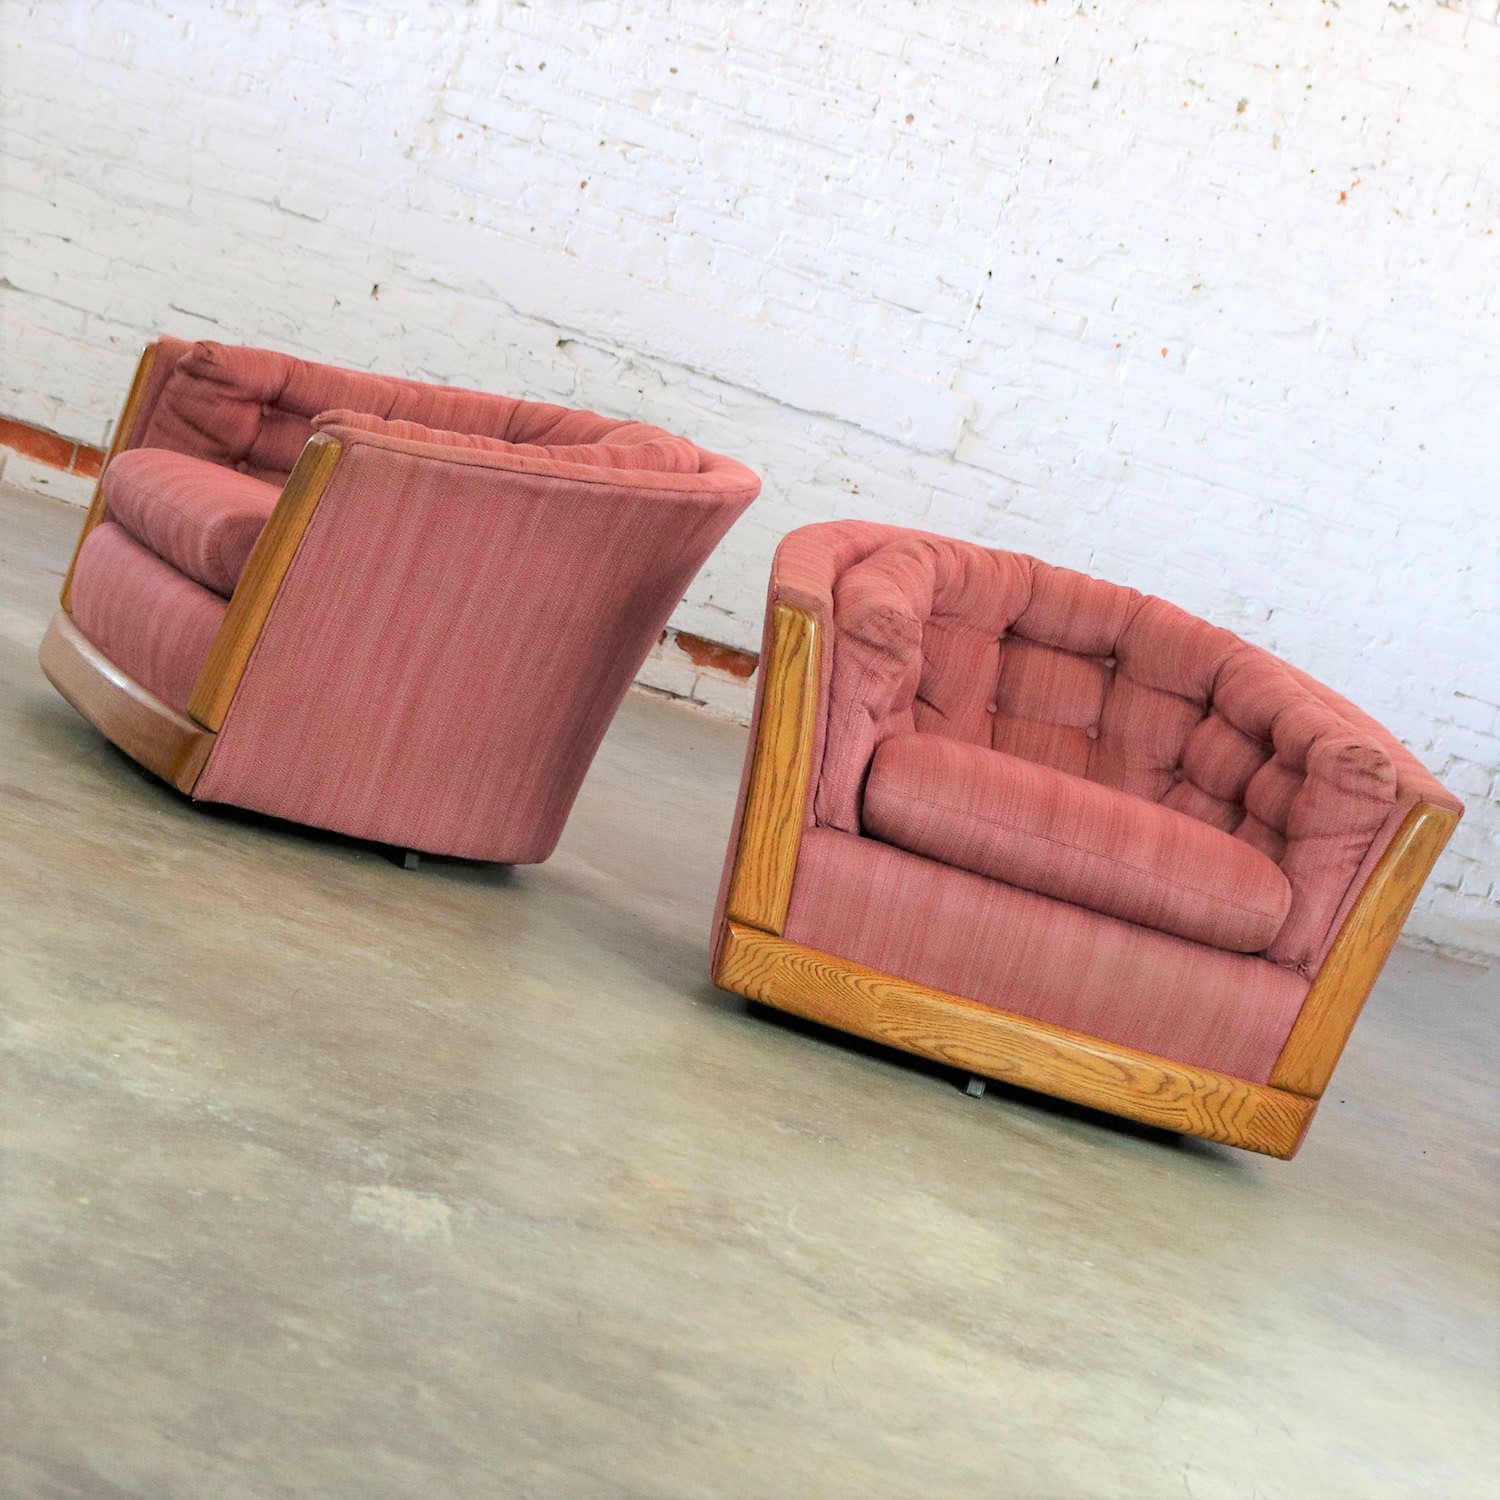 Pair of Swivel Barrel Chairs with Oak Trim Style of Milo Baughman or Harvey Probber